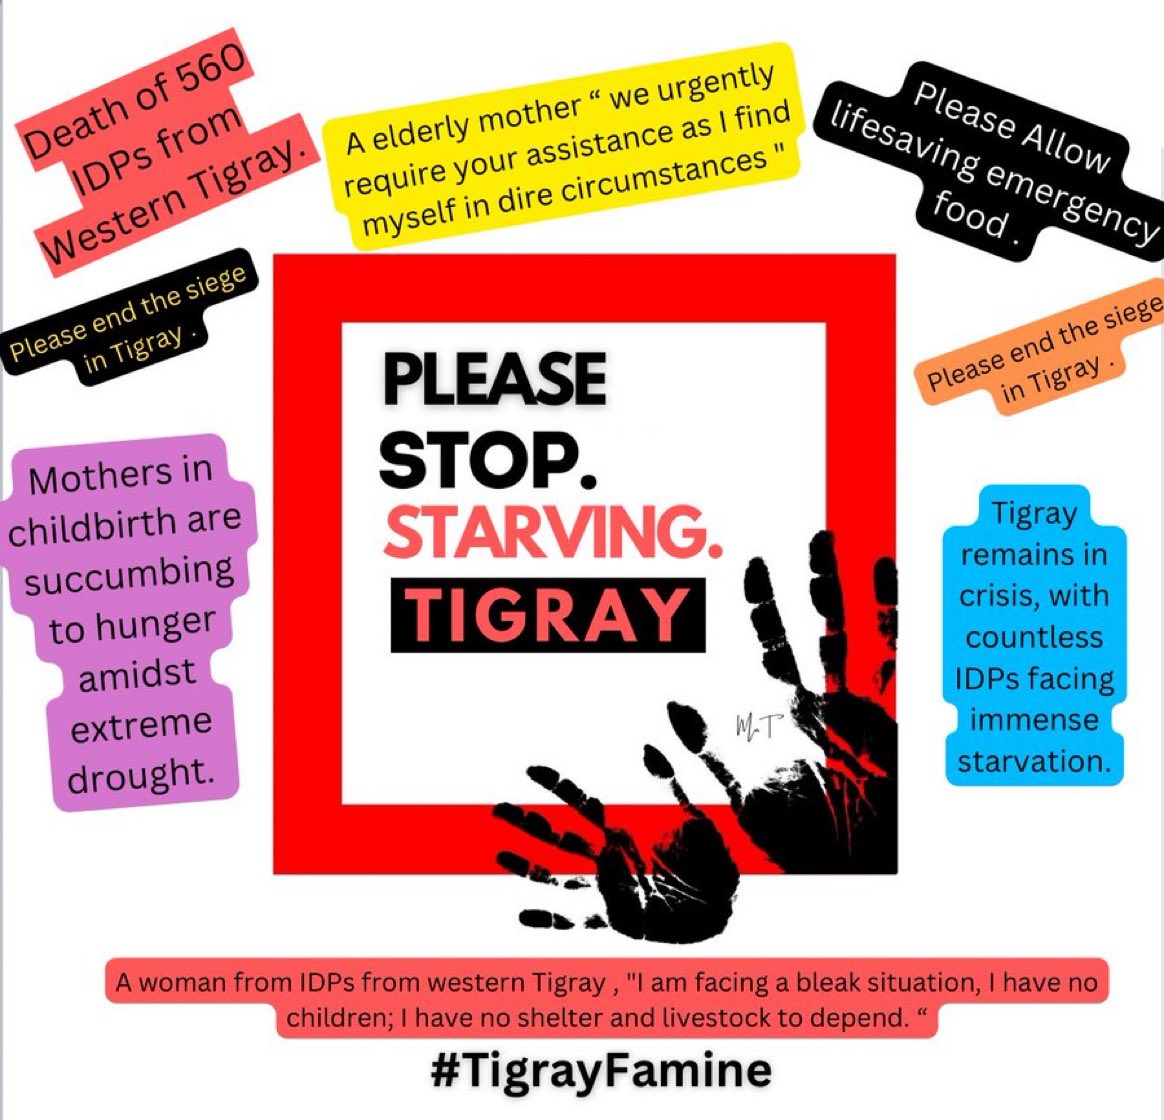 ♦️The #Tigray genocide’s aftermath, compounded by drought, demands immediate humanitarian intervention. 

#TigrayFamine #Aid4Tigray #AUSummit @EU_UNGeneva @_AfricanUnion @EUatUN @UNHumanRights @ICRC_dc @USAID @Refugees @AUC_PAPS @BradSherman @SecBlinken @Sally_Keeble